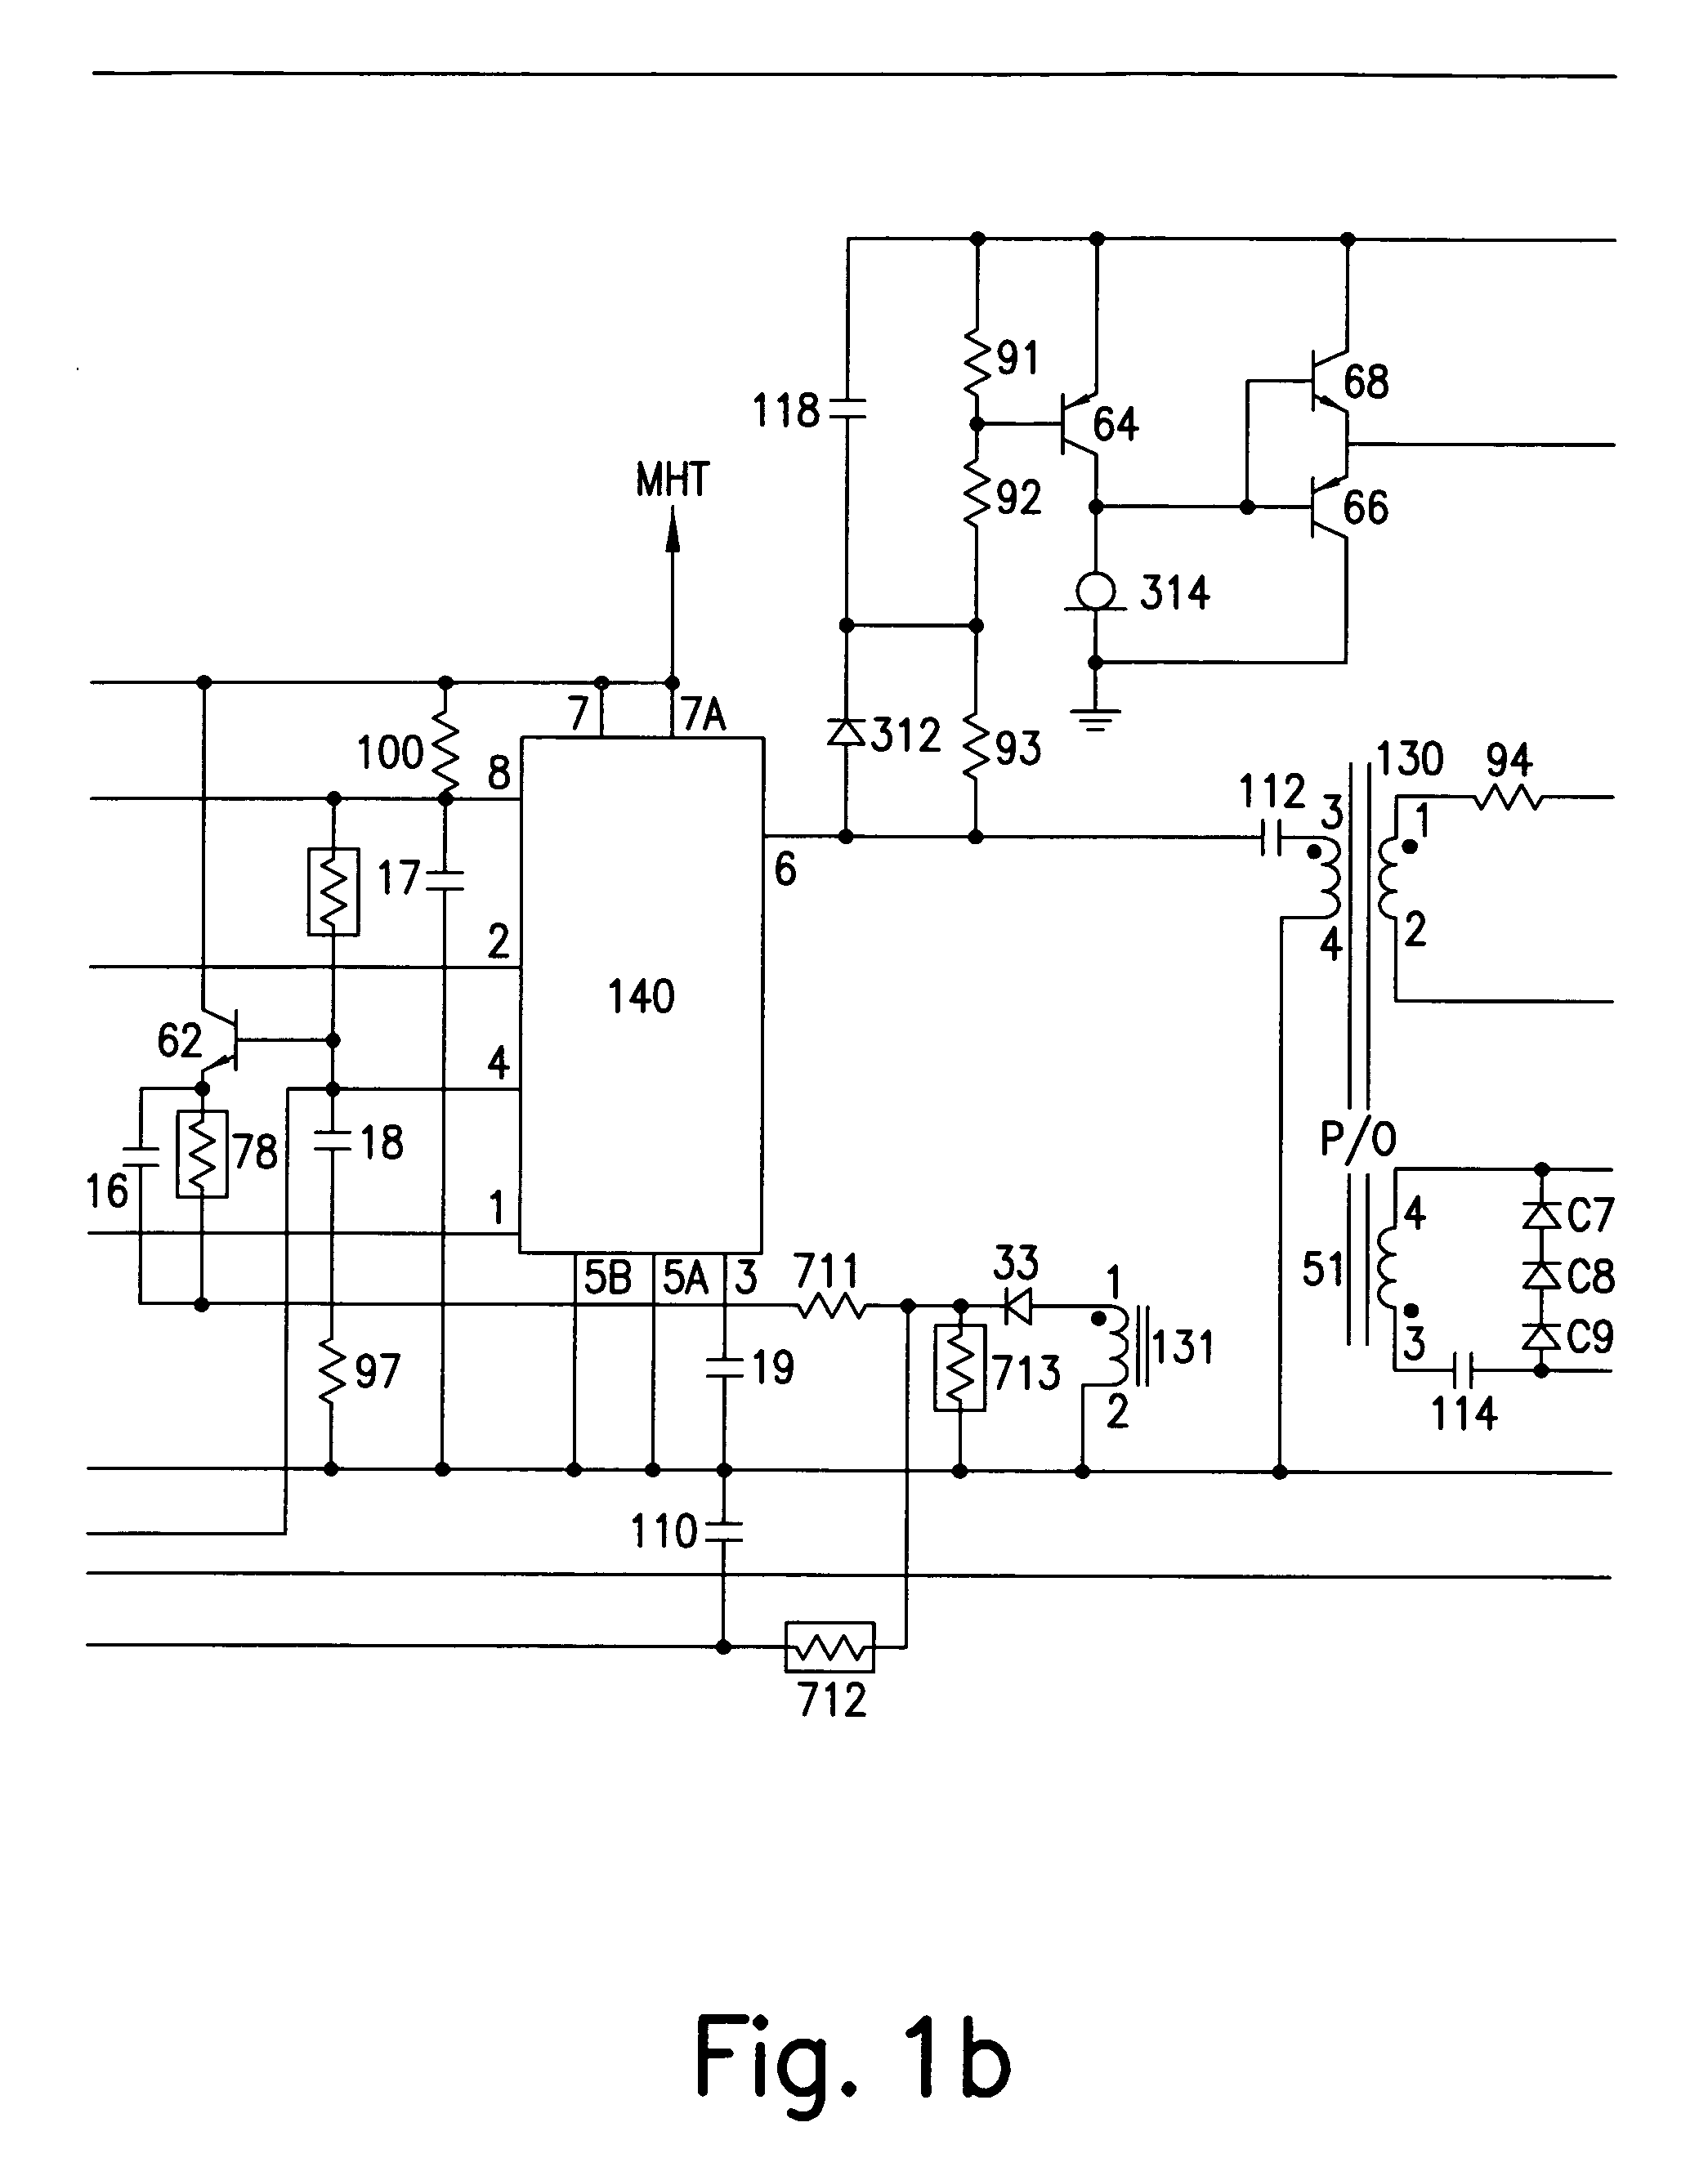 Method for implementing radiation hardened, power efficient, non isolated low output voltage DC/DC converters with non-radiation hardened components